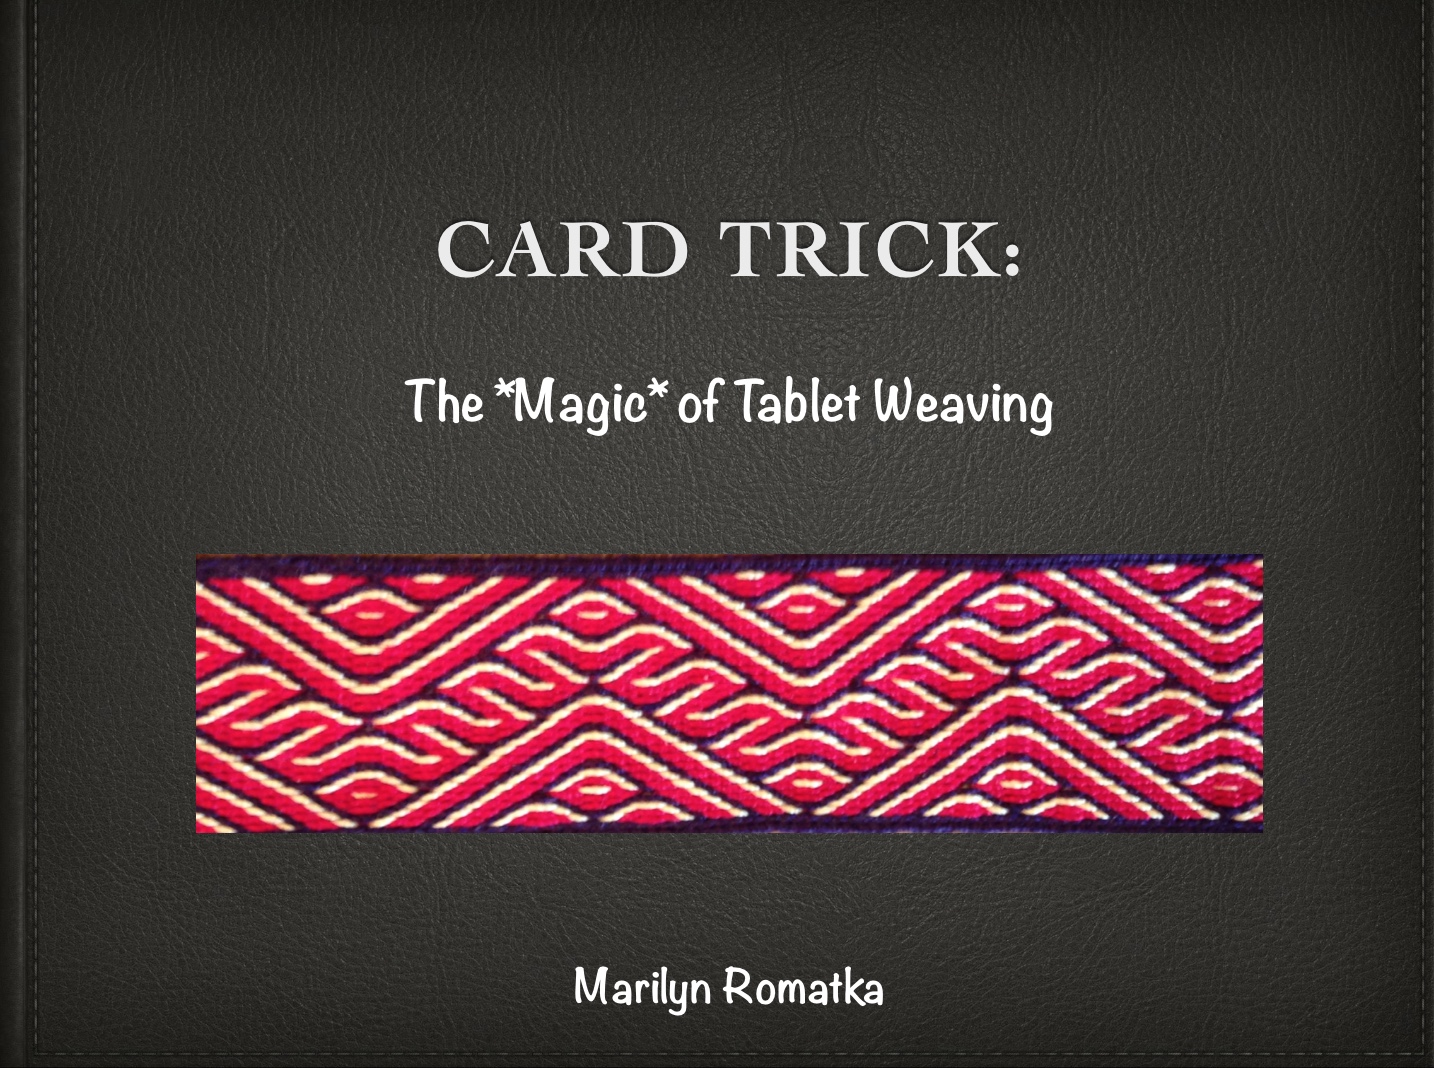 Card Trick: The Magic of Tablet Weaving